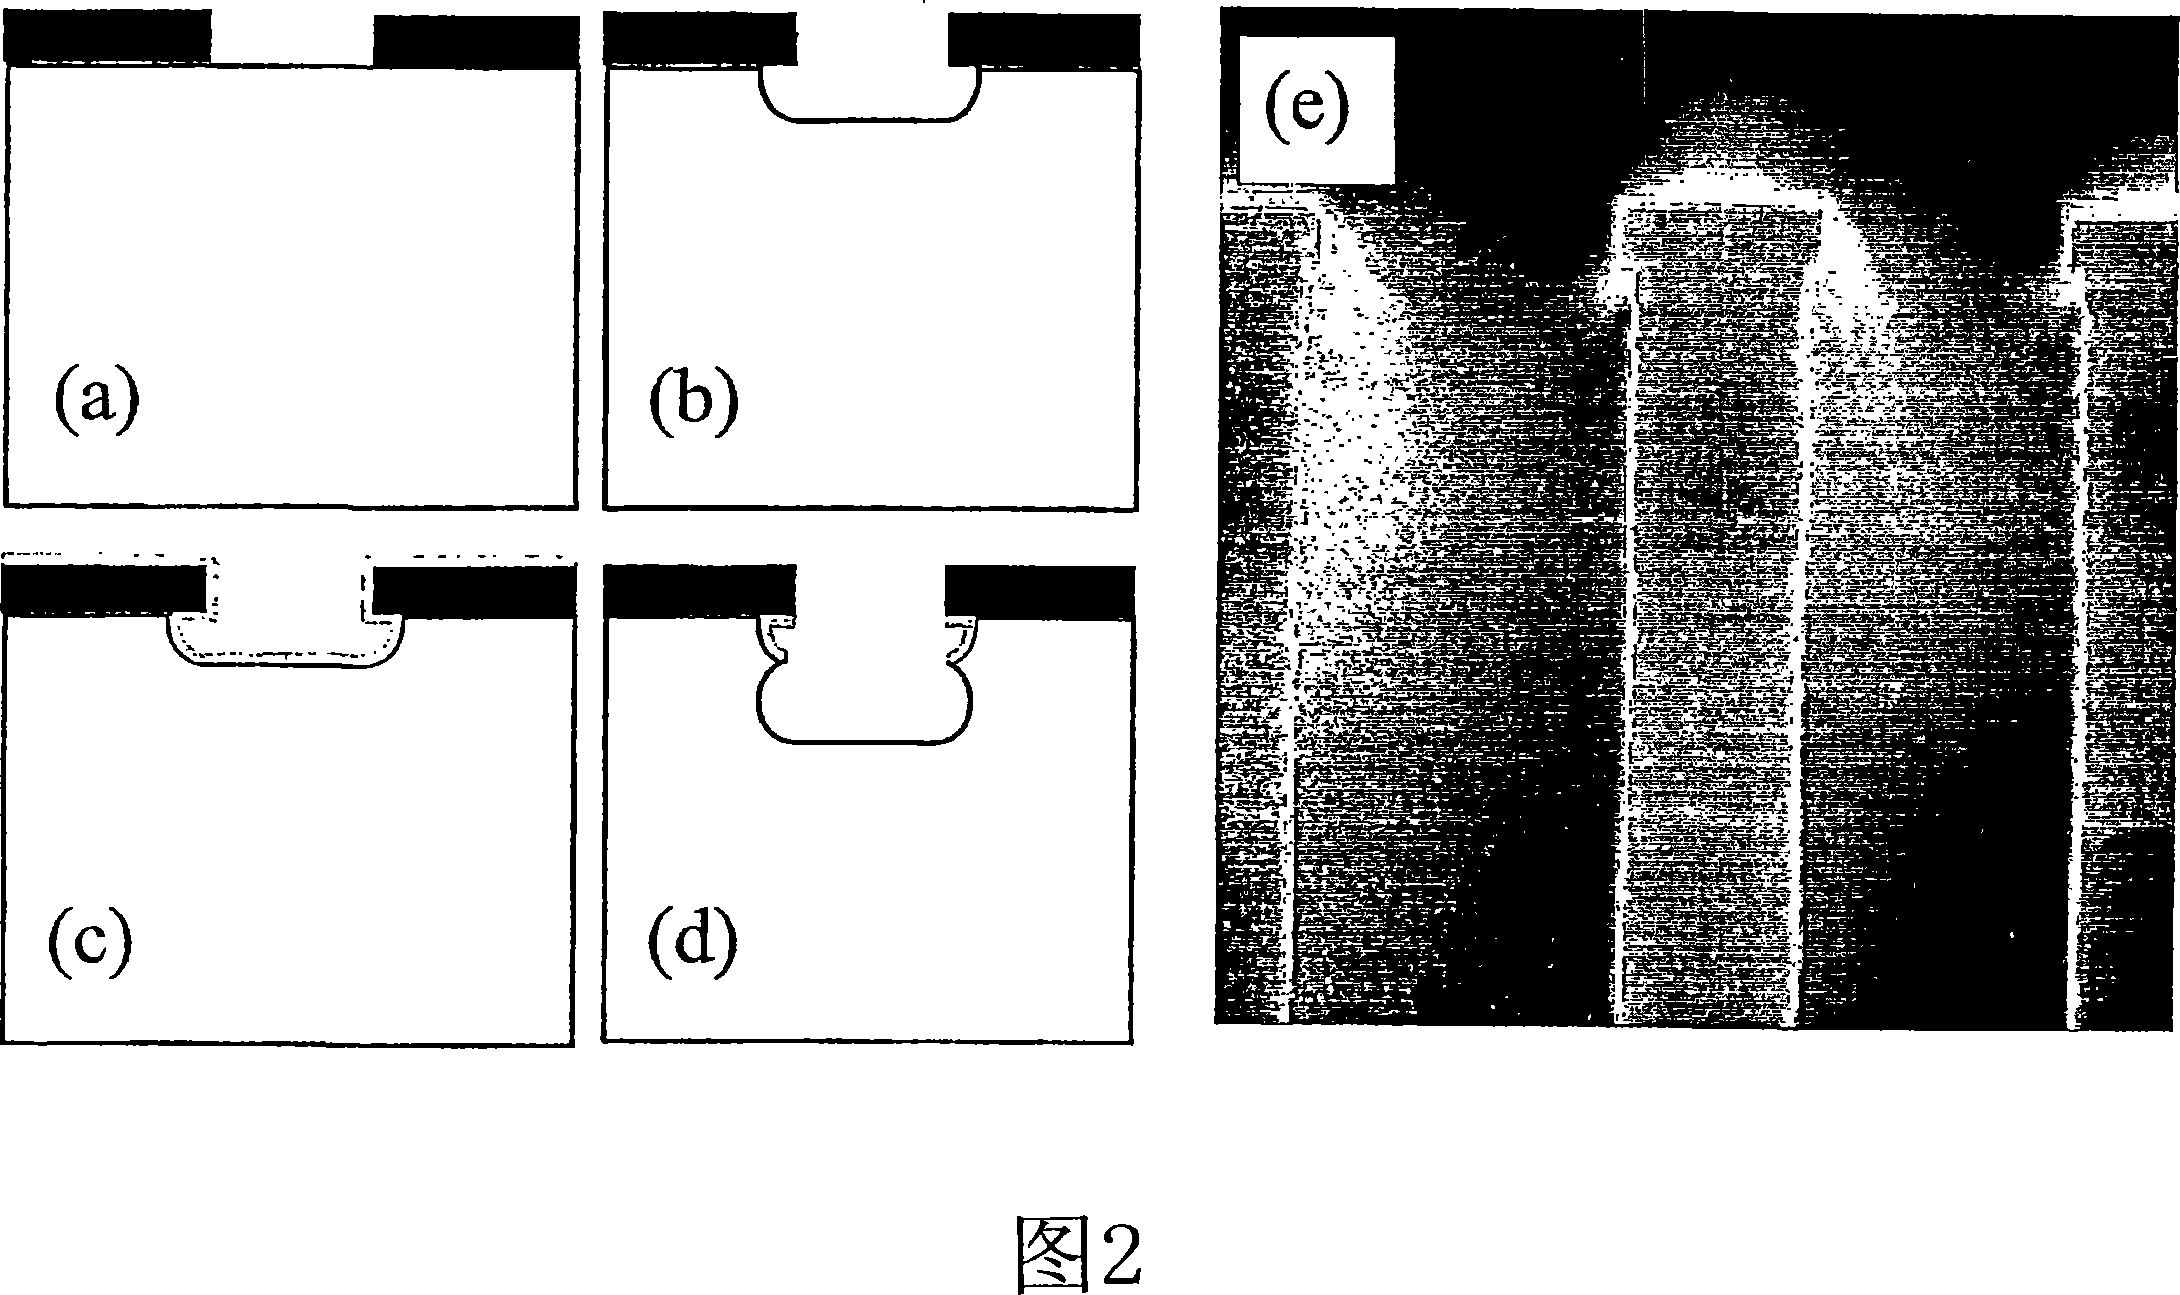 Selection of wavelenghts for end point in a time division multiplexed process